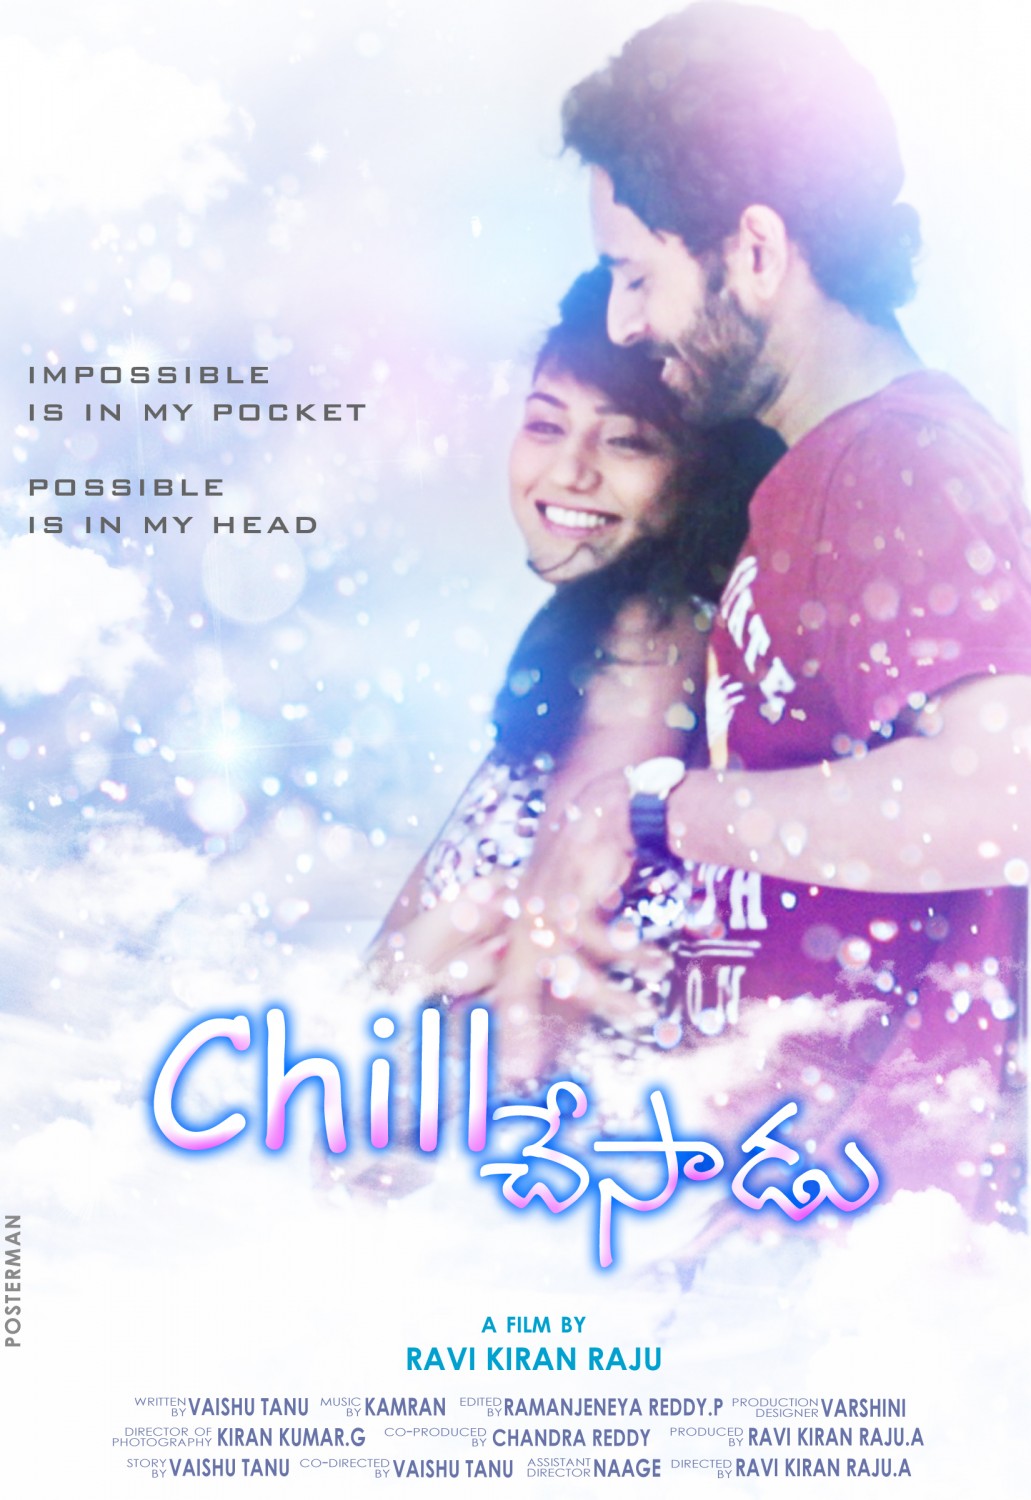 Extra Large Movie Poster Image for Chill Chesadu